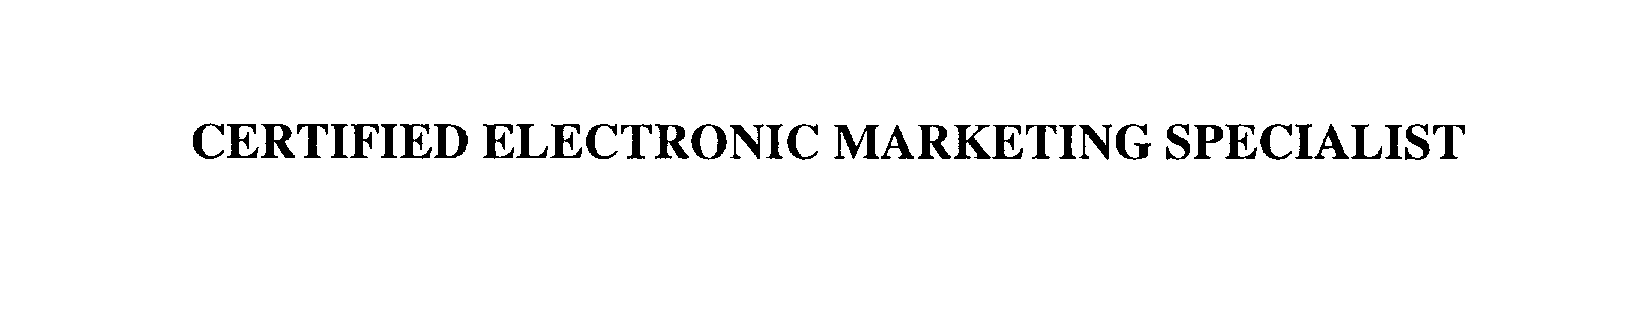  CERTIFIED ELECTRONIC MARKETING SPECIALIST